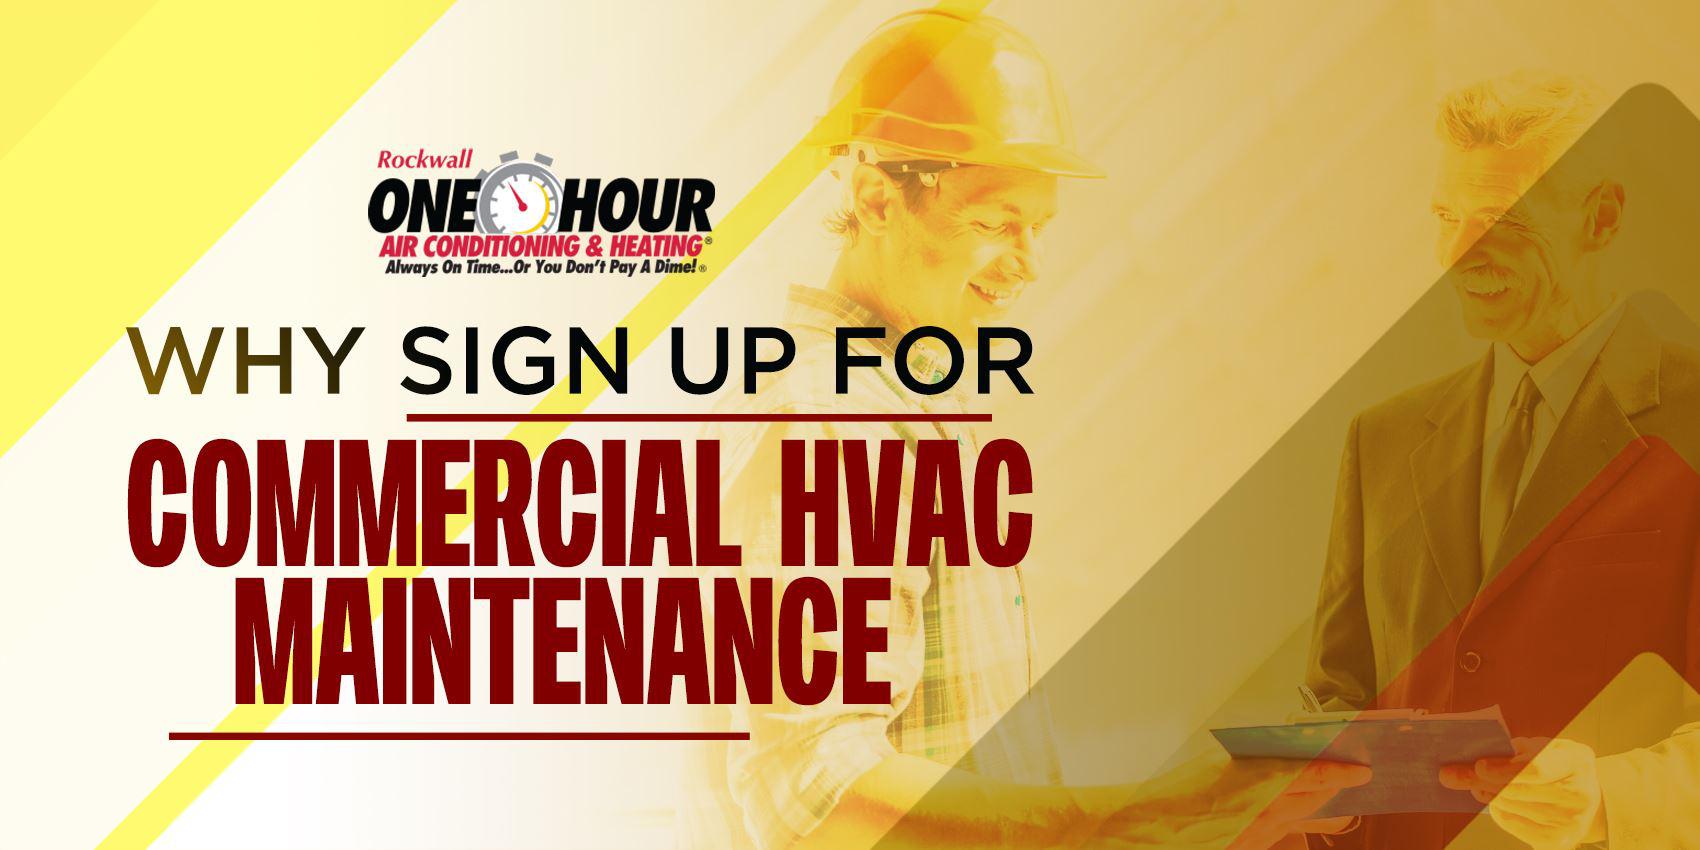 Why Sign Up For Commercial HVAC Maintenance